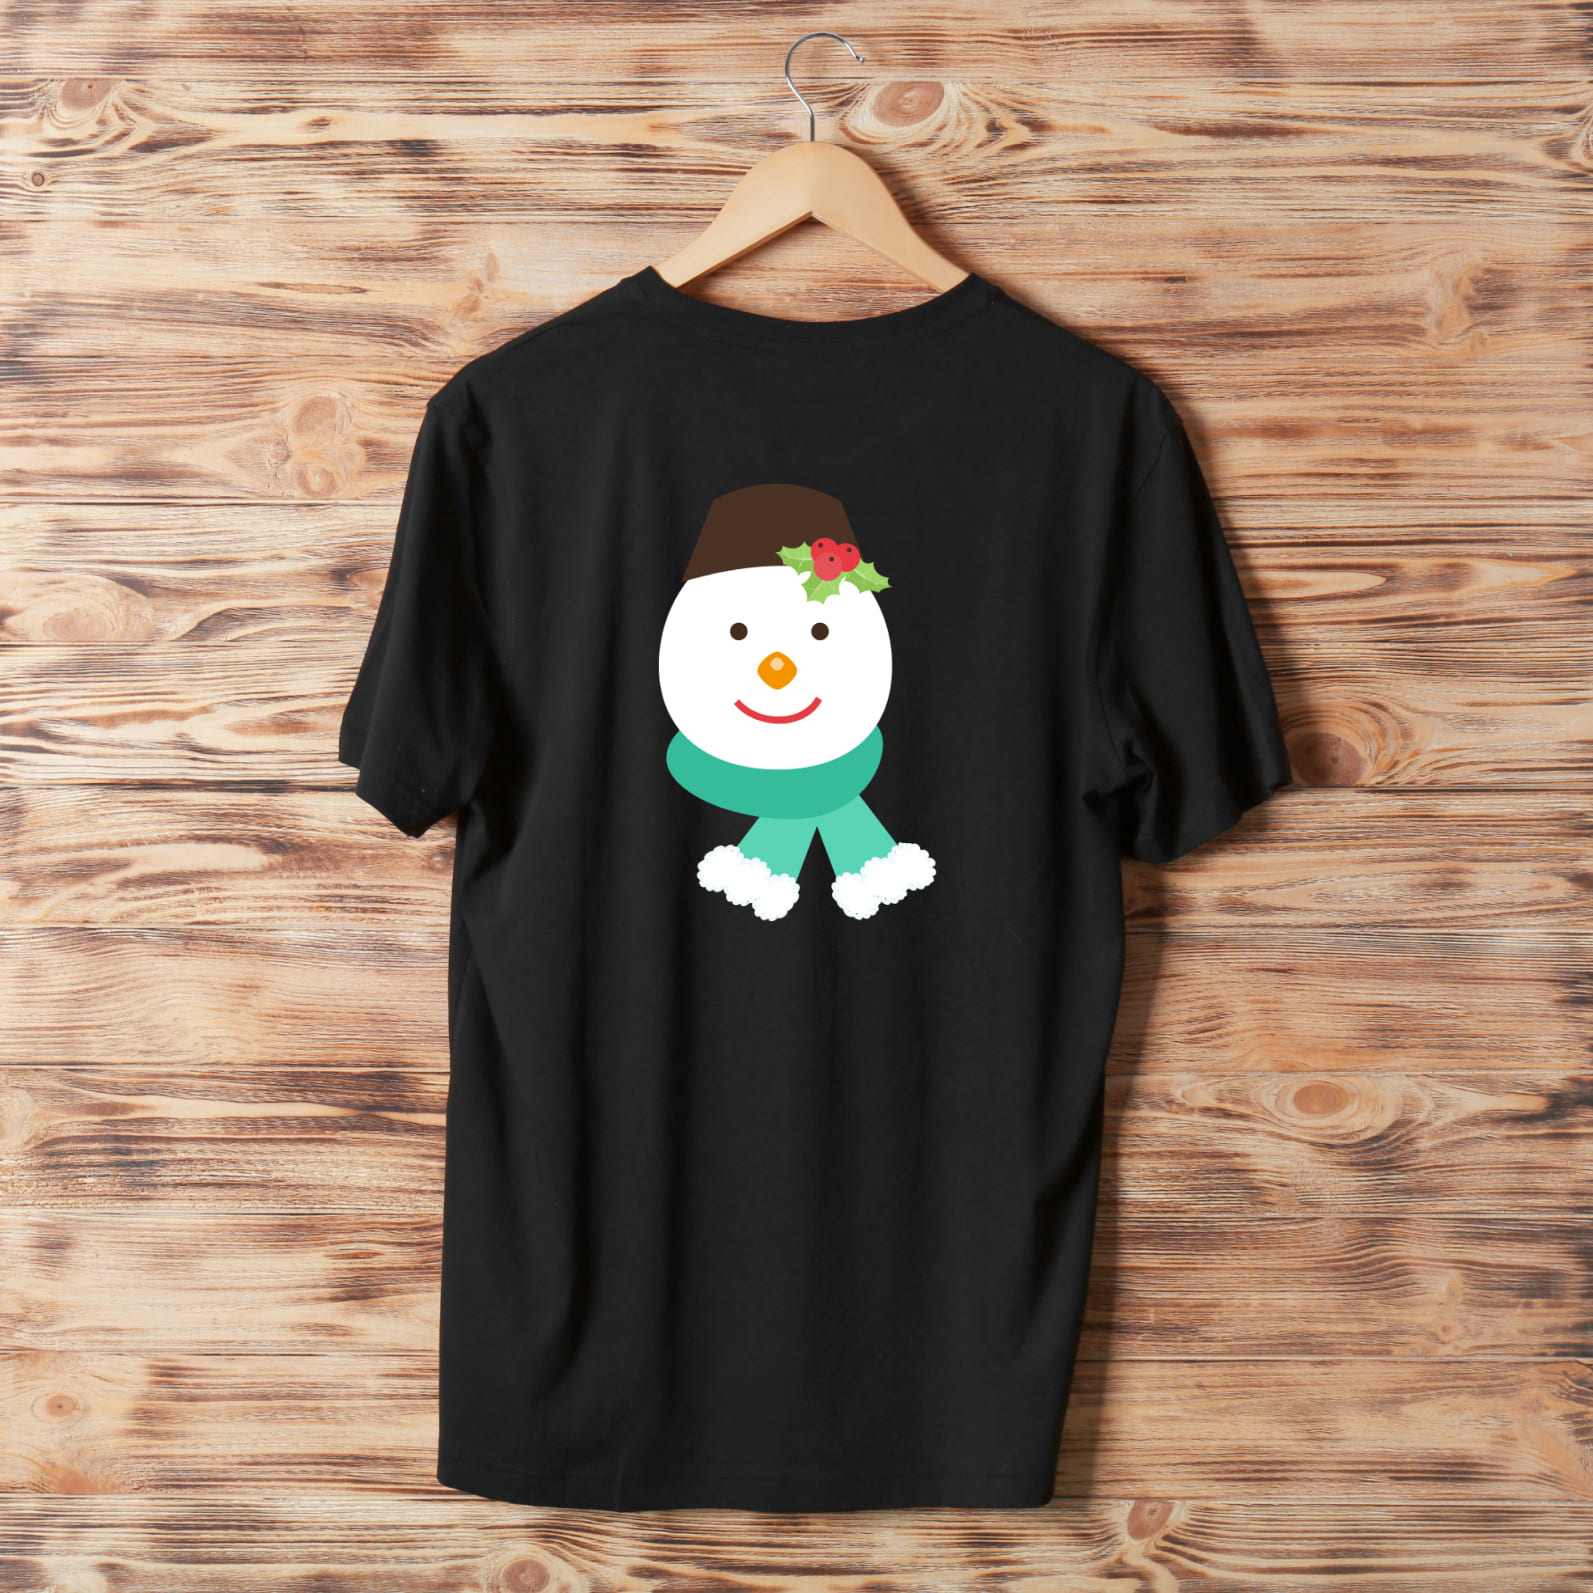 Black t-shirt with the cute Christmas snowman face.